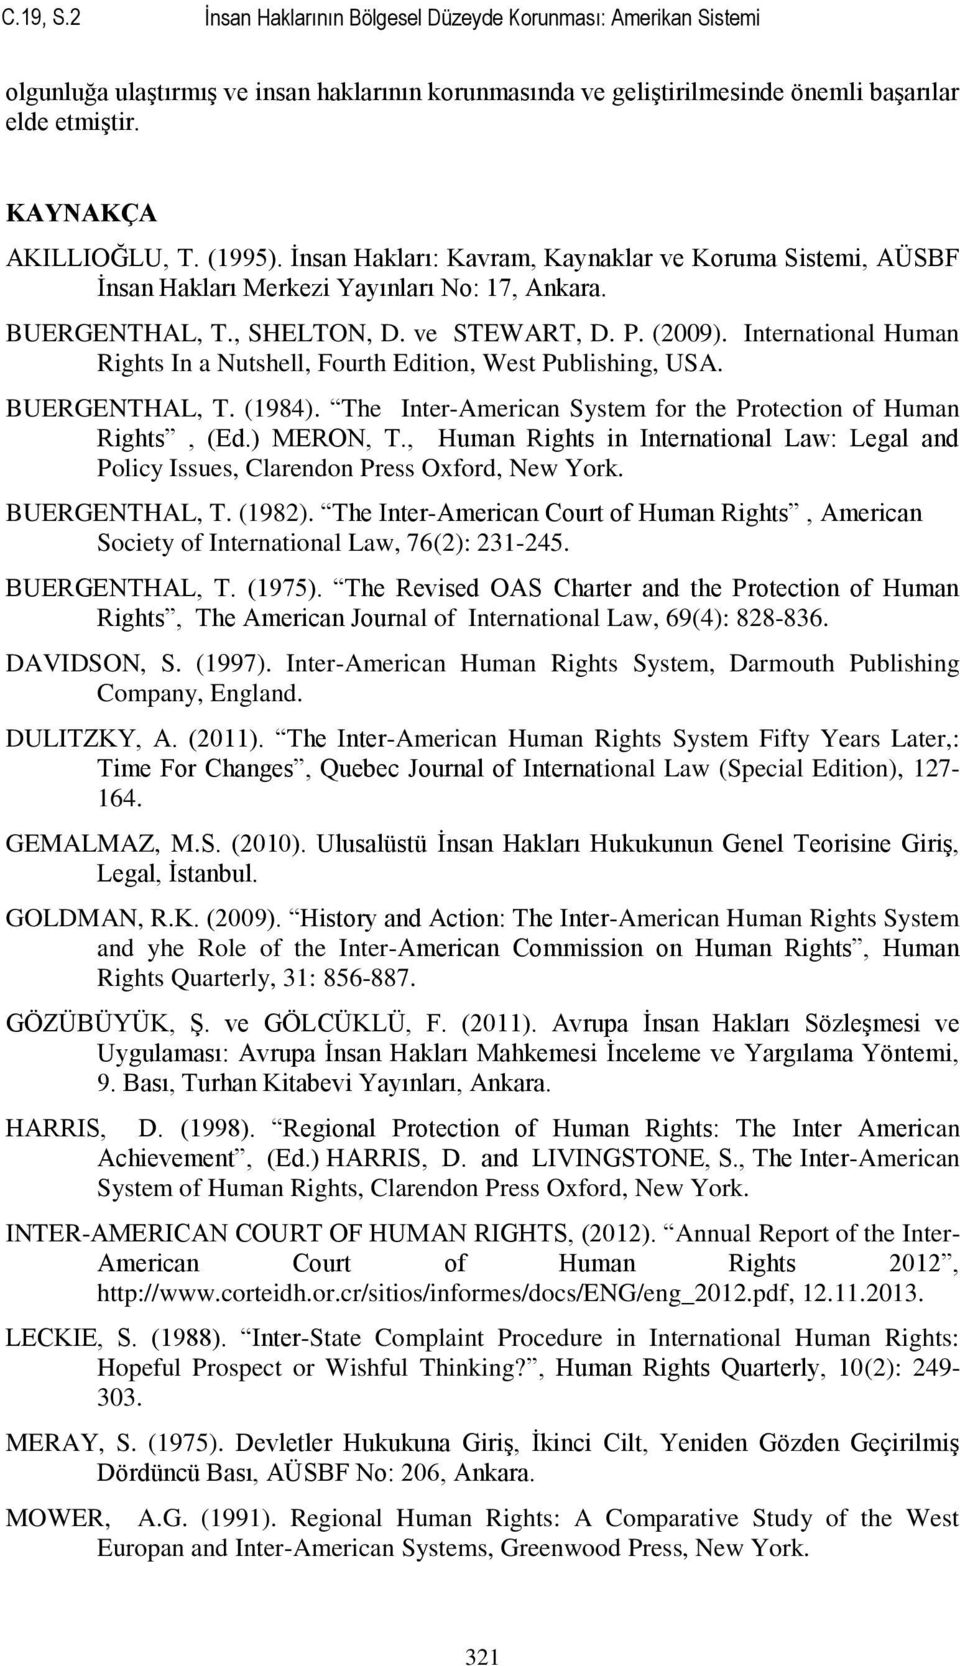 International Human Rights In a Nutshell, Fourth Edition, West Publishing, USA. BUERGENTHAL, T. (1984). The Inter-American System for the Protection of Human Rights, (Ed.) MERON, T.